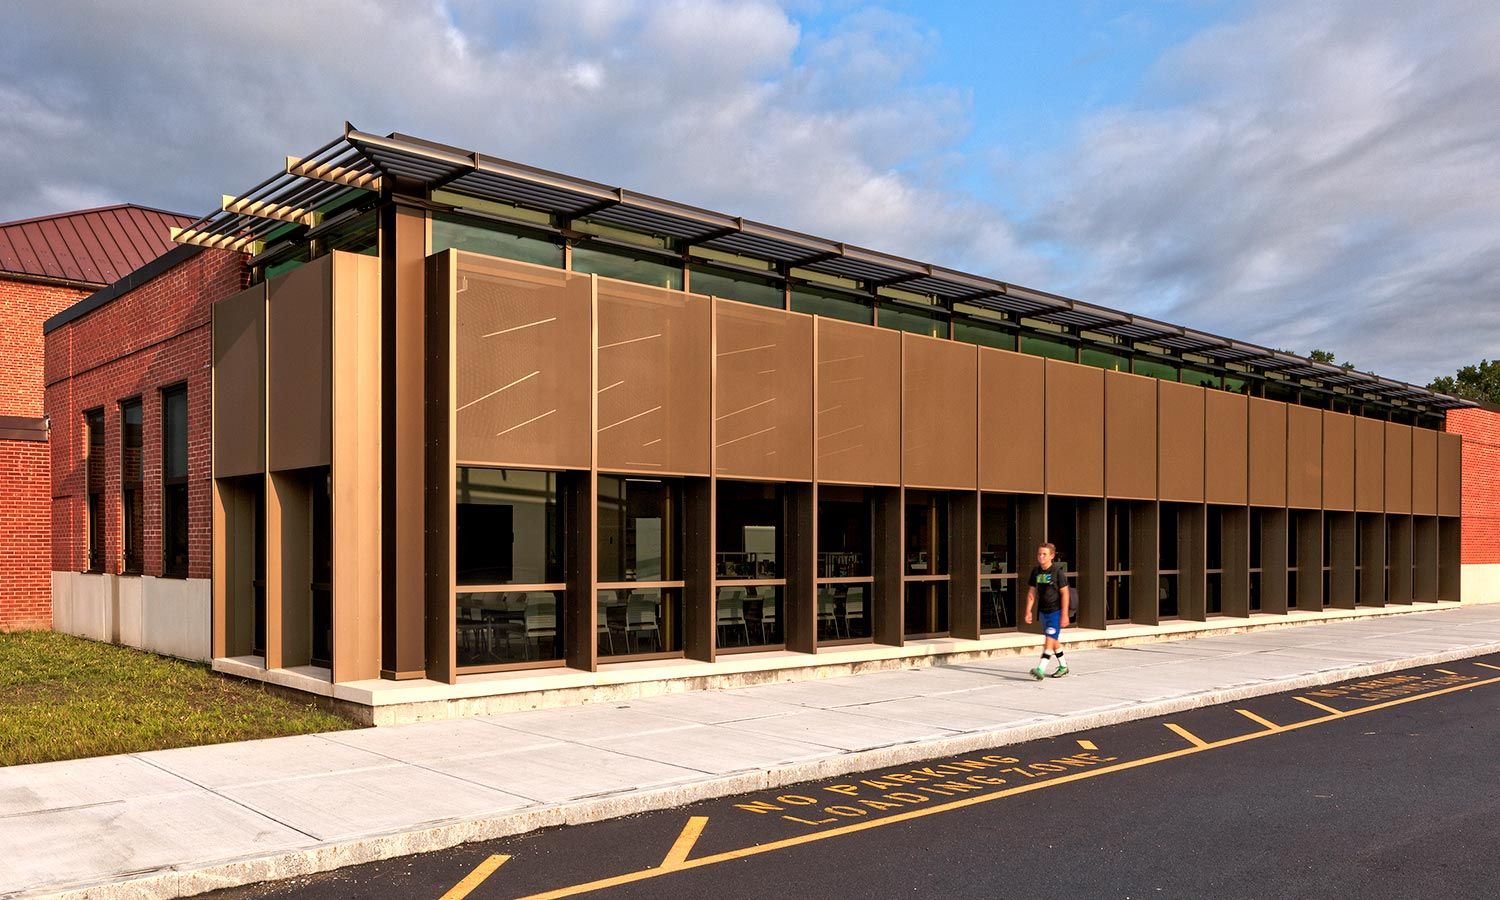 Coxsackie-Athens Central School District, Capital Project